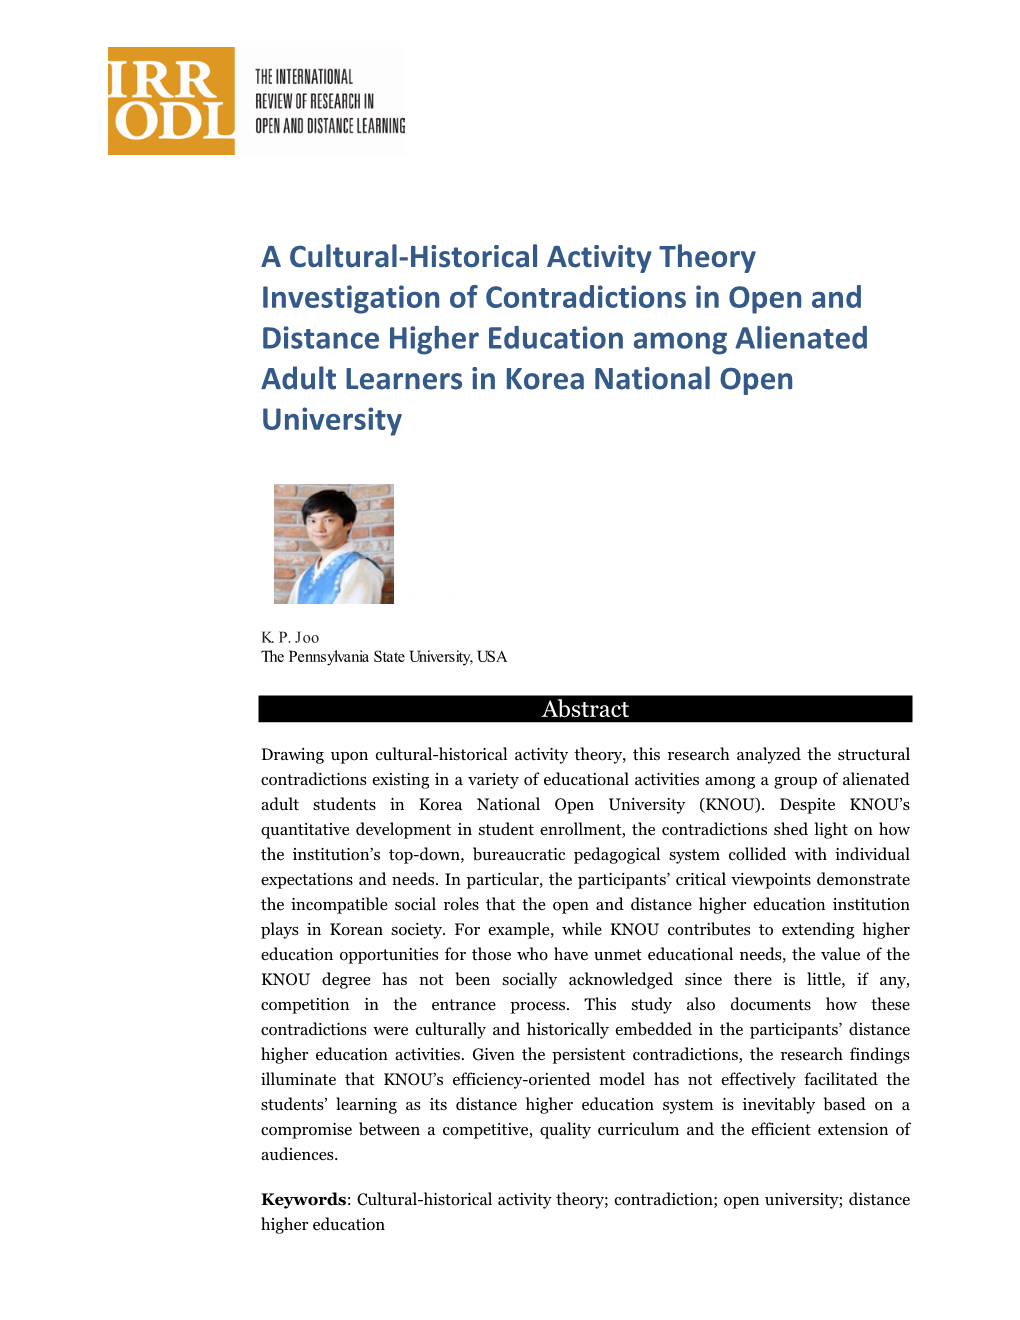 A Cultural-Historical Activity Theory Investigation of Contradictions In